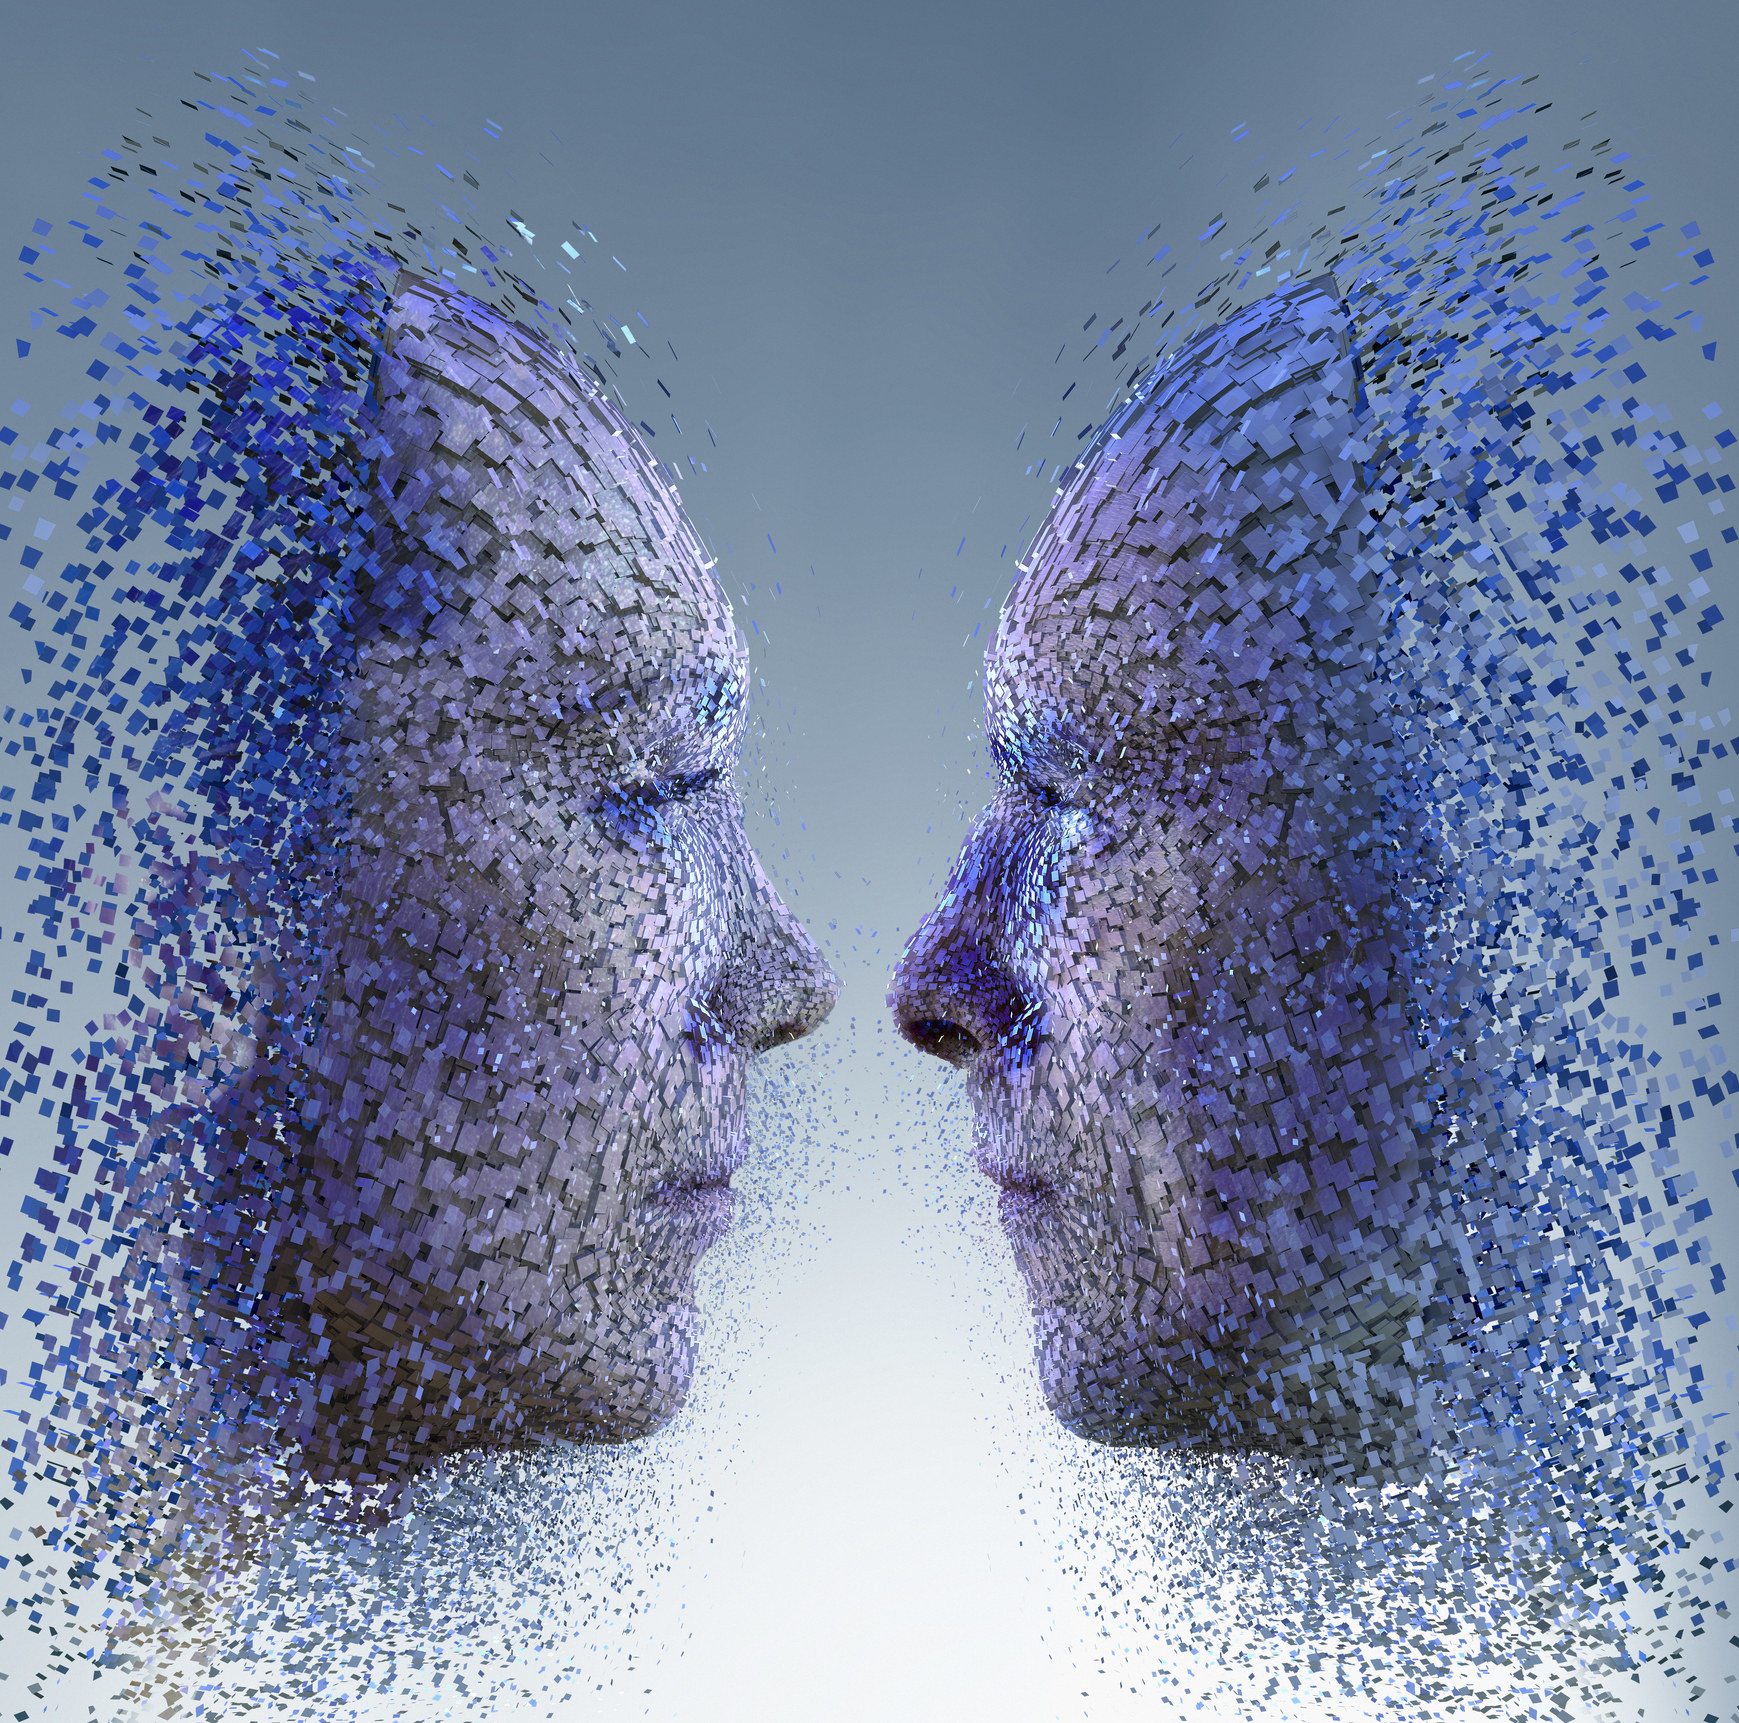 Two AI talking to each other